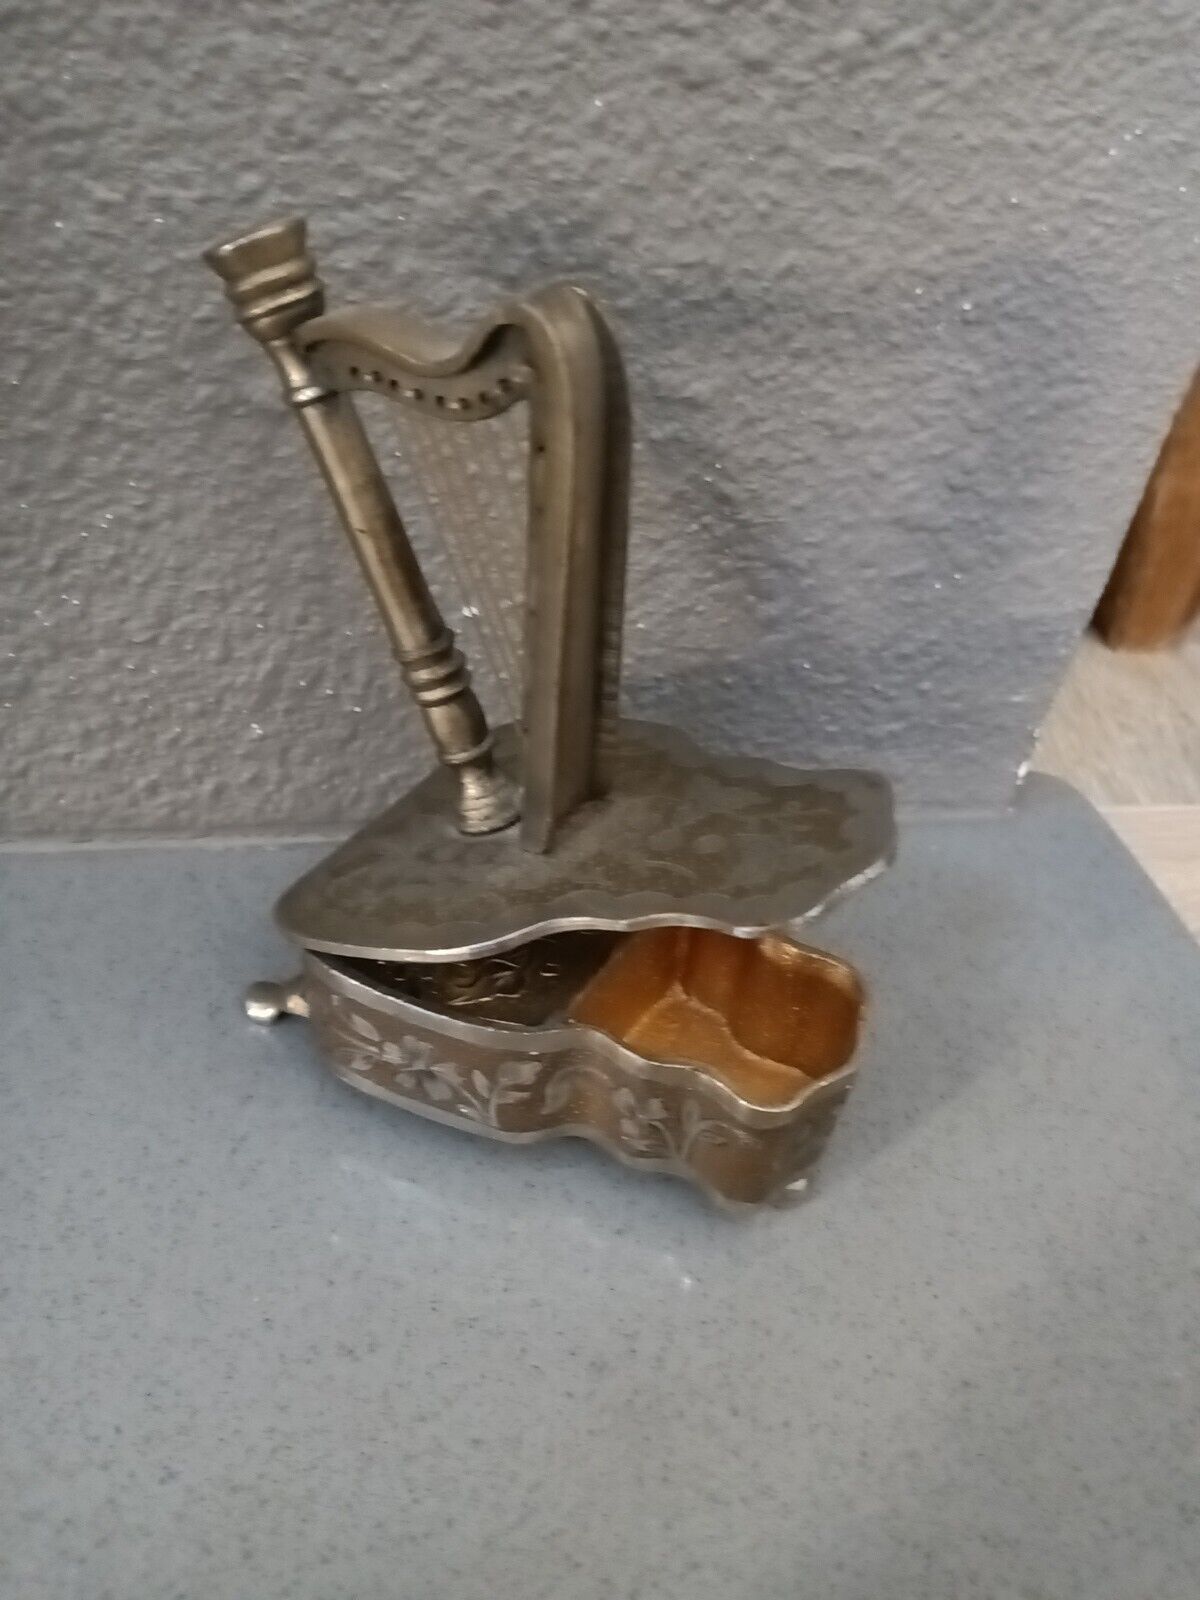 FRED ZIMBALIST Music Box Etched Harp Shape Works Great Collectable 